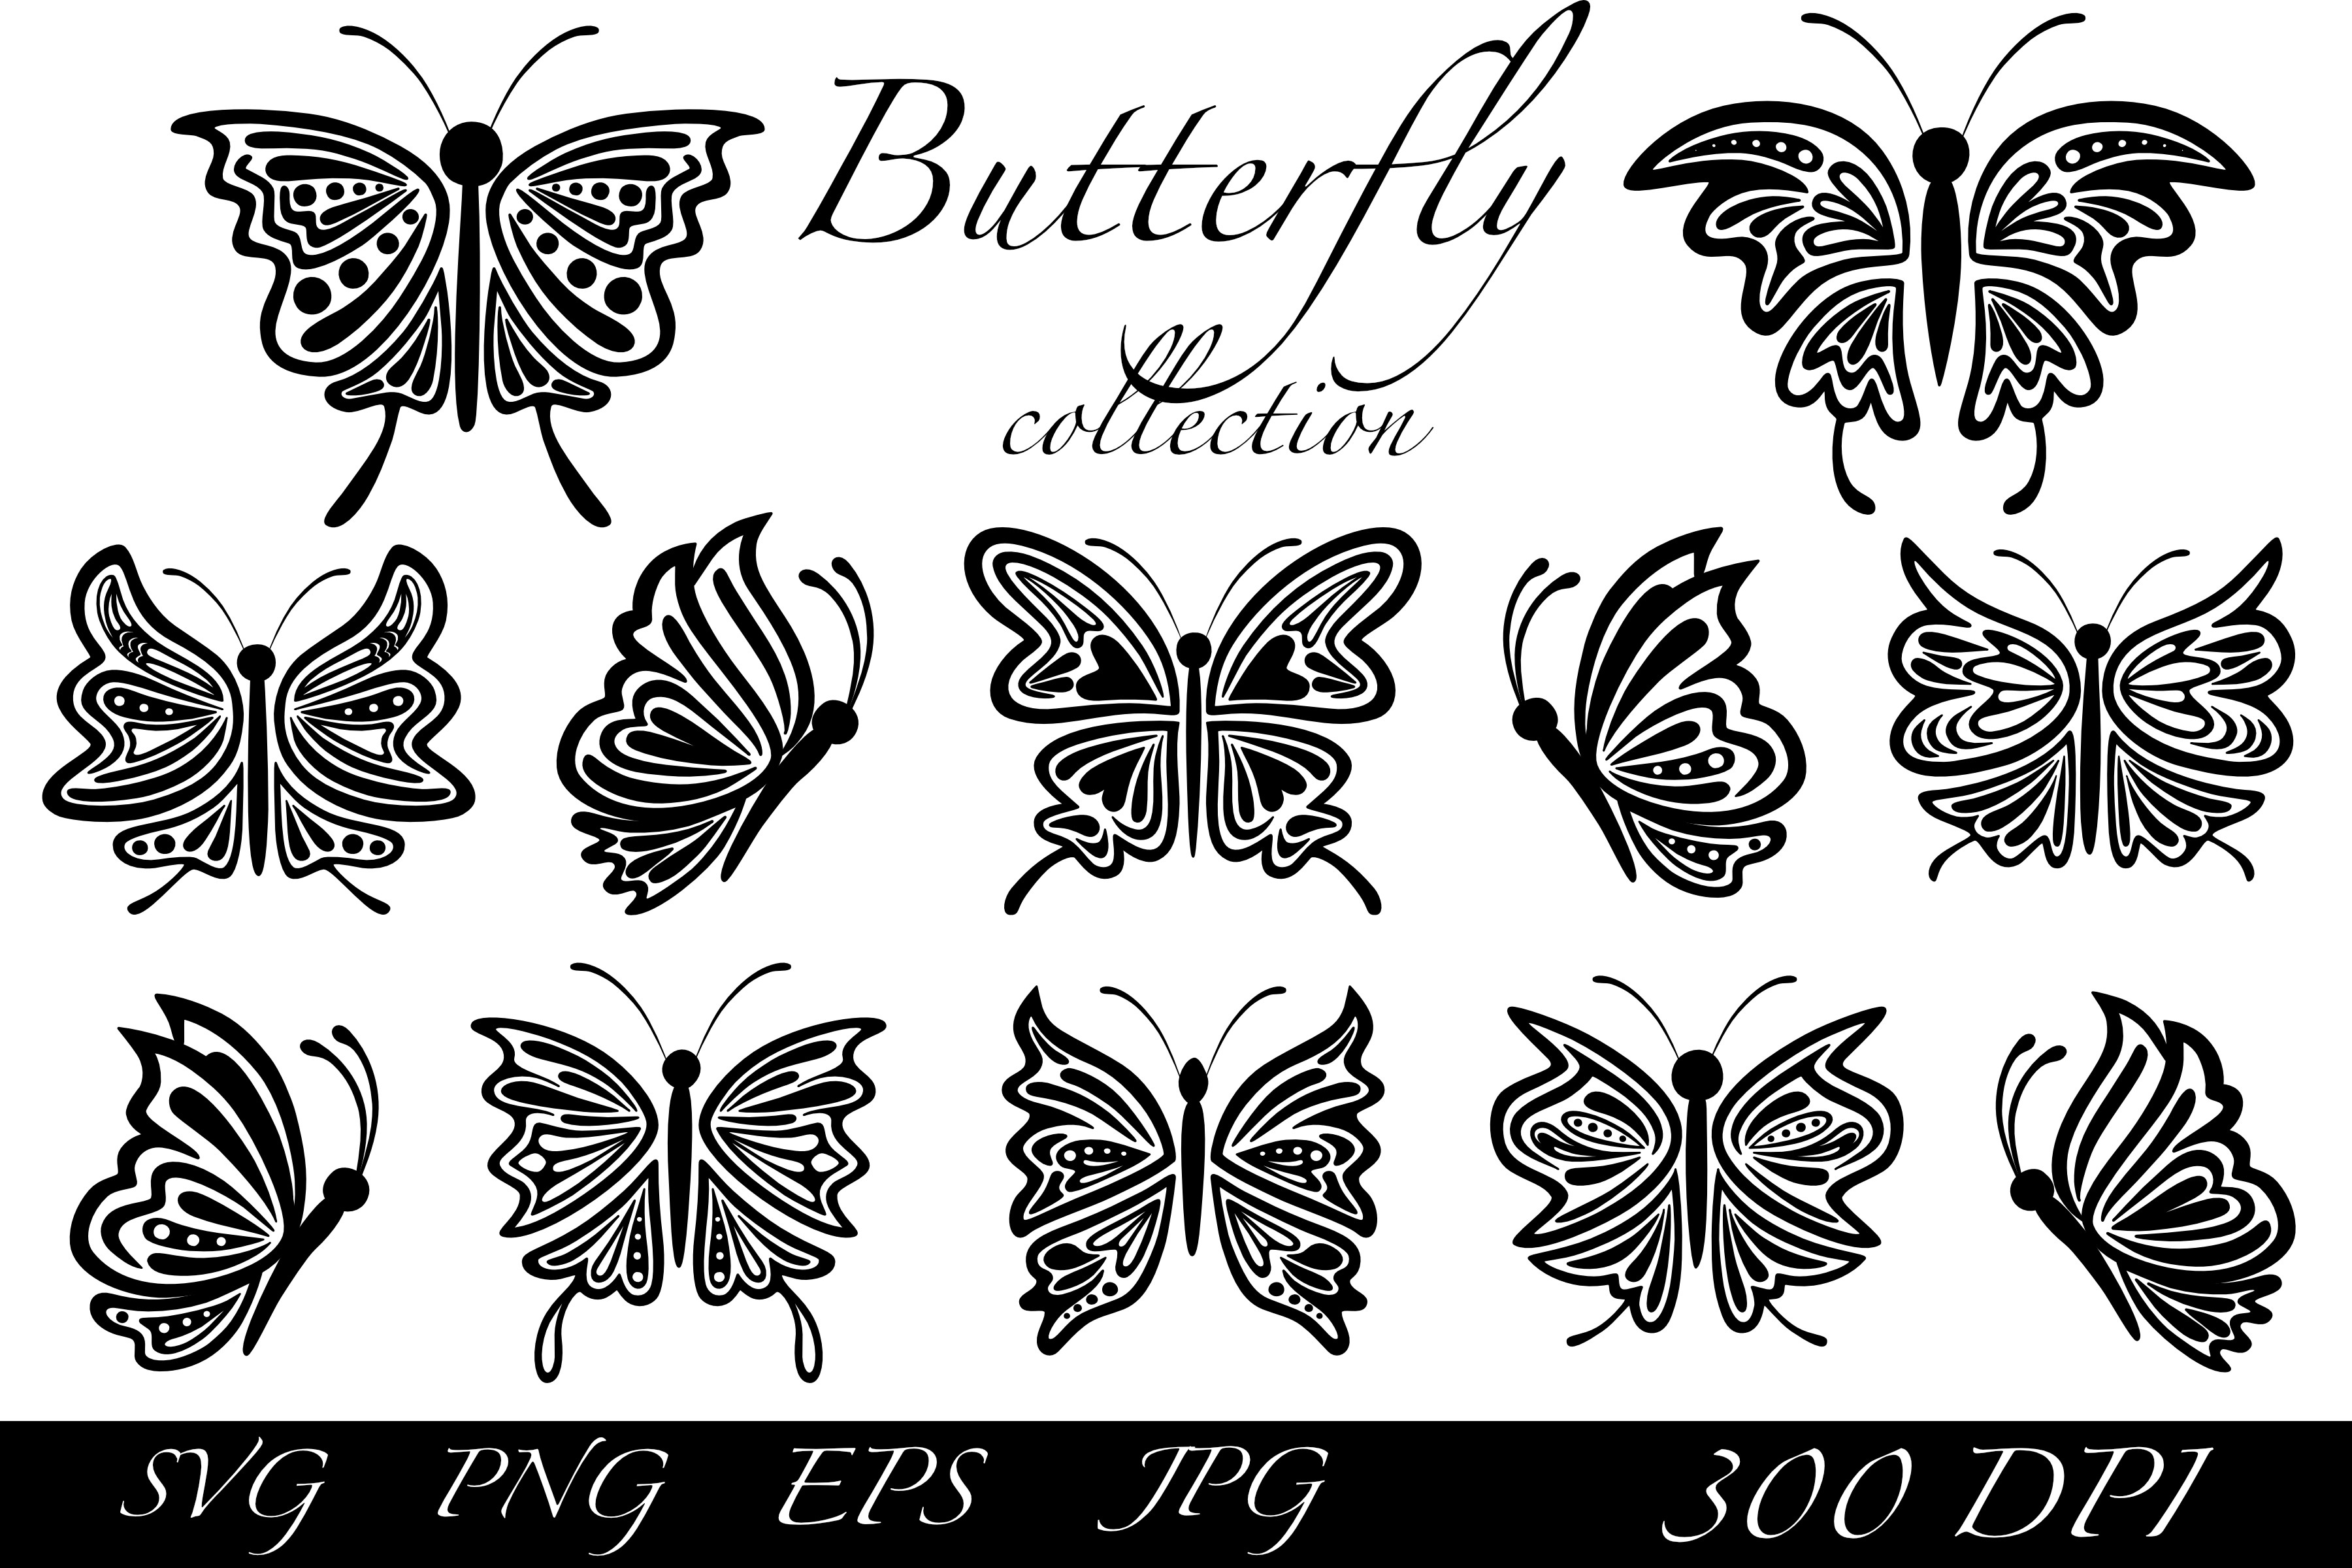 Butterfly Collection (12 Elements) Graphic by auauaek4 · Creative Fabrica